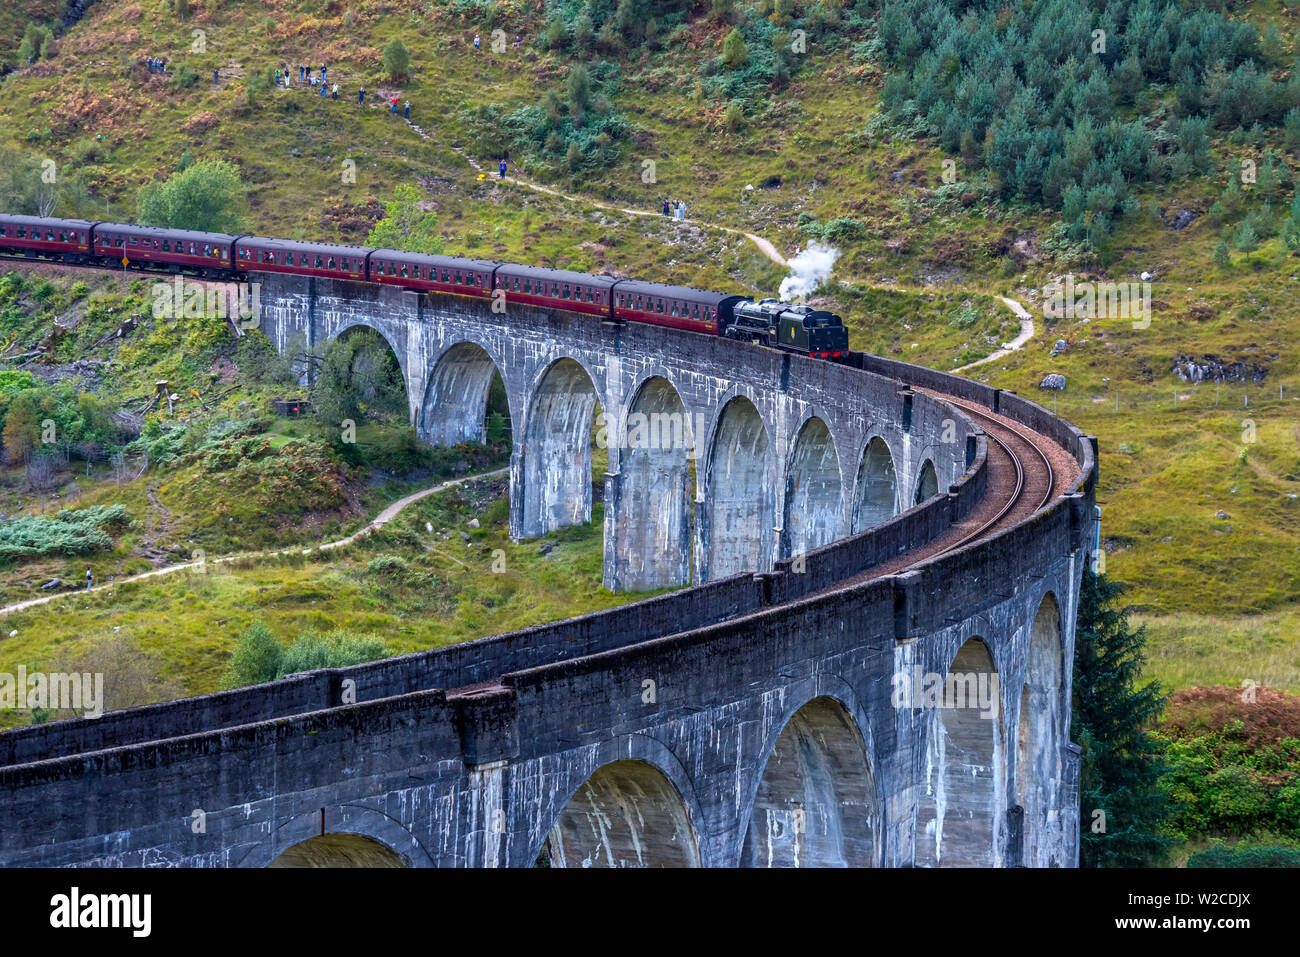 UK, Scotland, Highland, Loch Shiel, Glenfinnan, Glenfinnan Railway Viaduct, part of the West Highland Line, The Jacobite Steam Train, made famous in JK Rowling's Harry Potter as the Hogwarts Express Stock Photo